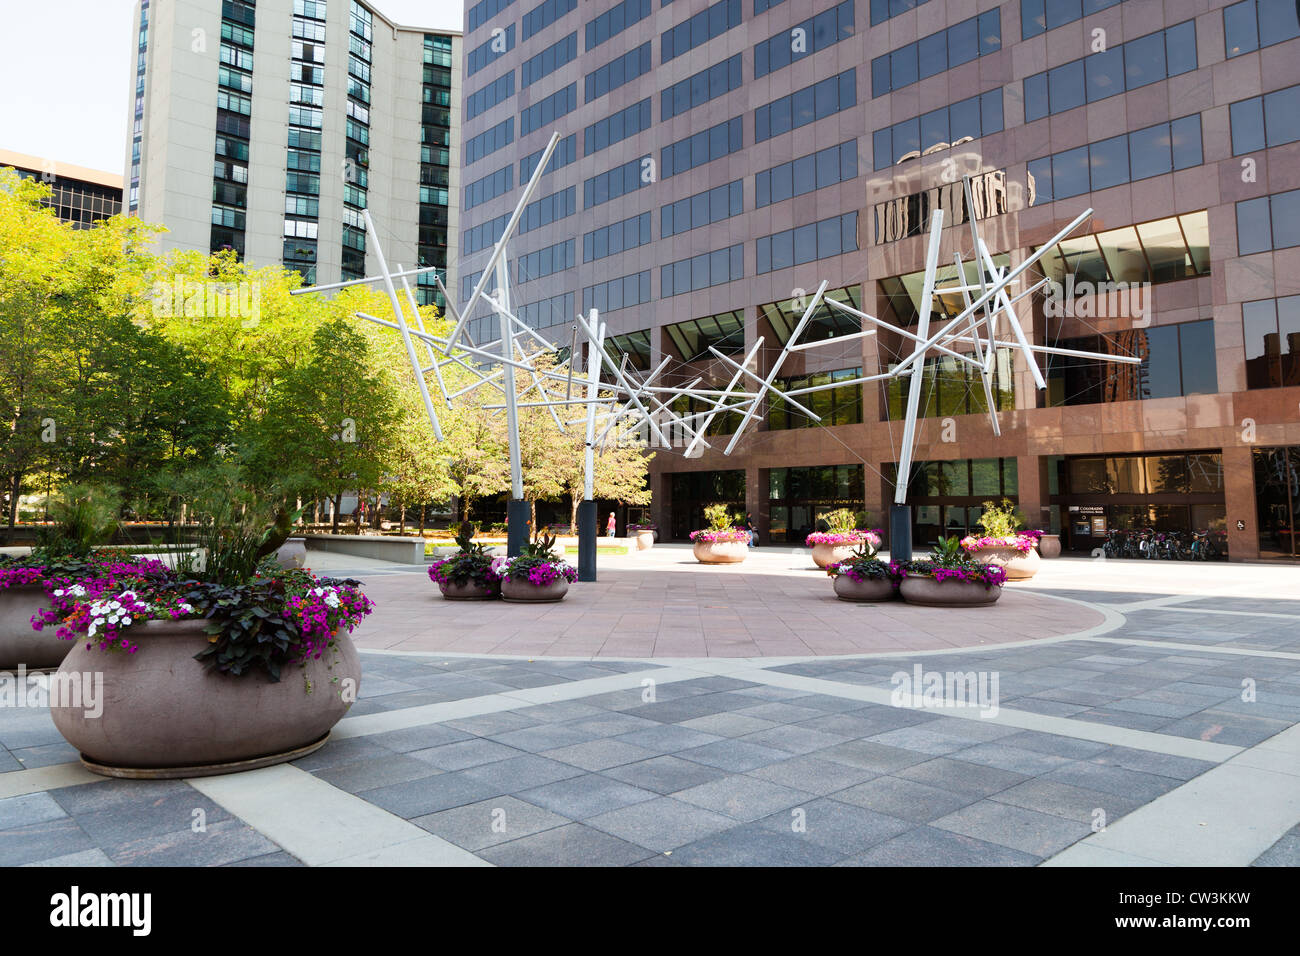 Public art on display at the 17th Street Plaza office building in Denver, Colorado USA Stock Photo